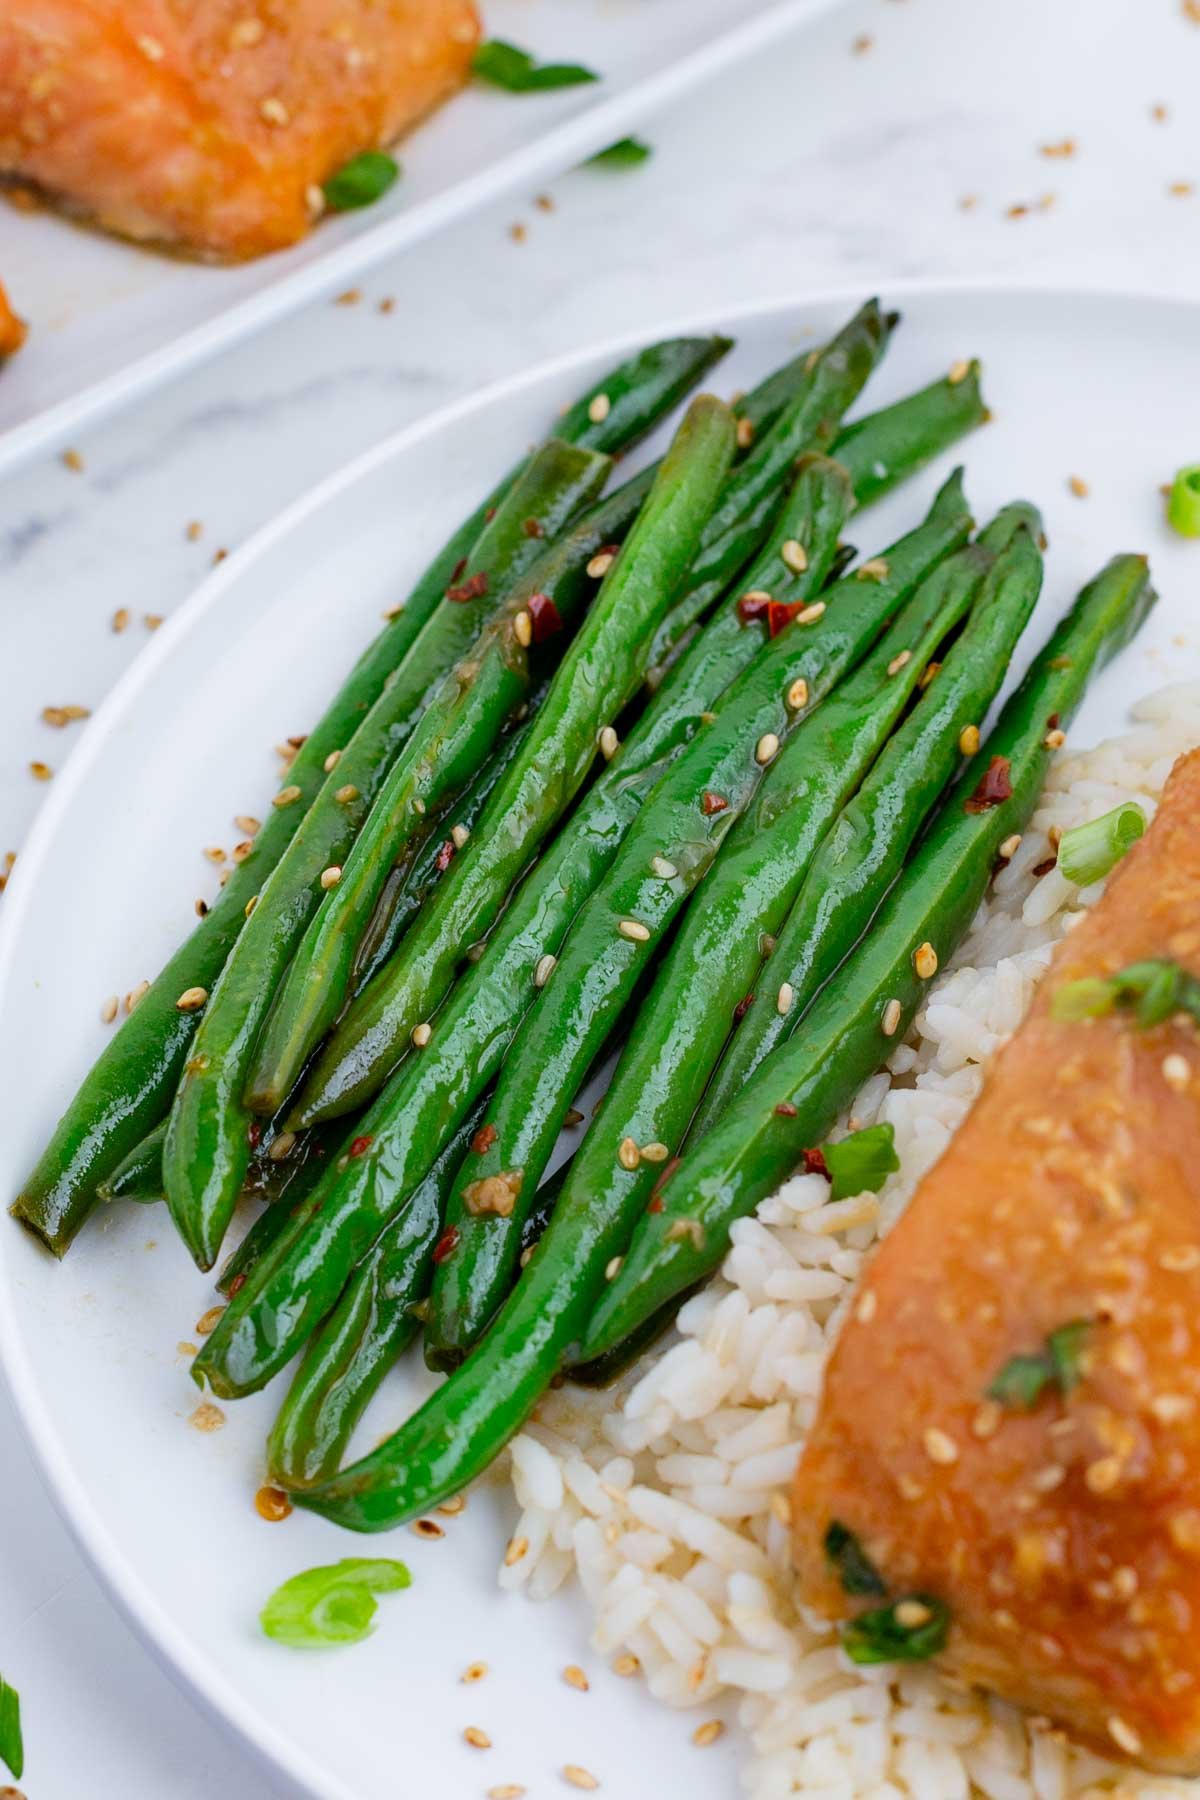 Skip the Chinese takeout and make these green beans at home.